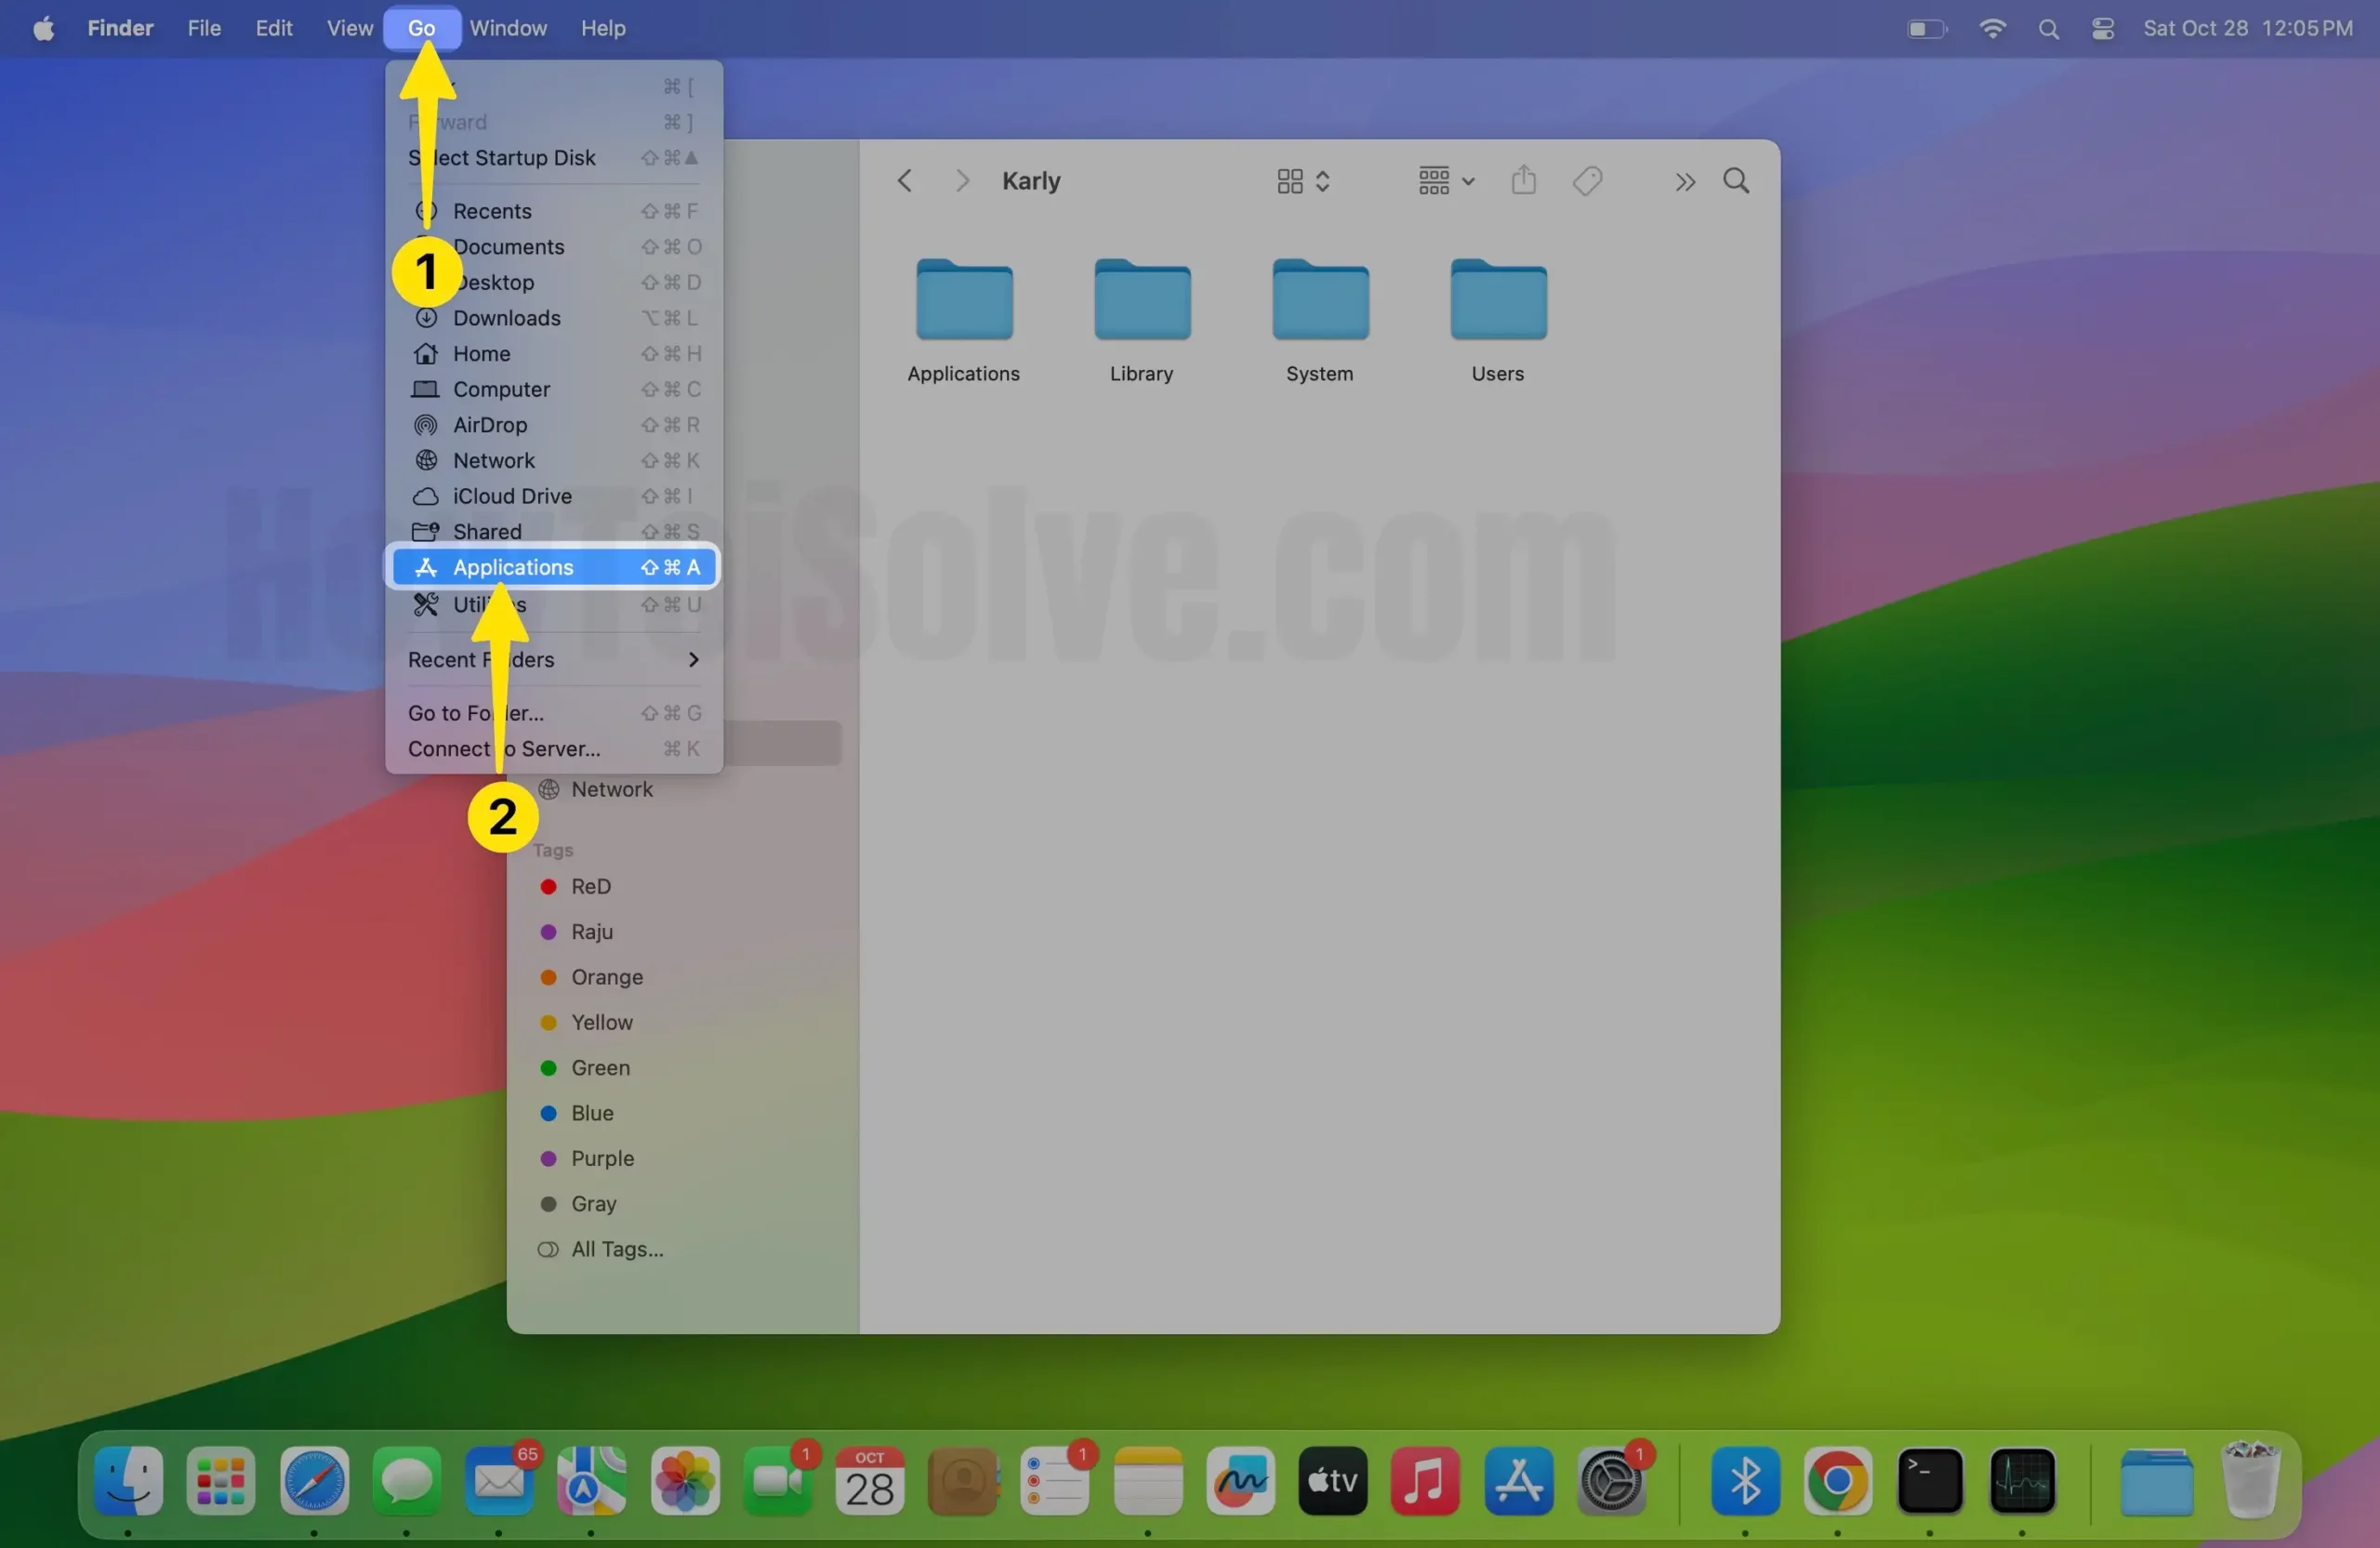 Open Applications in Finder on Mac